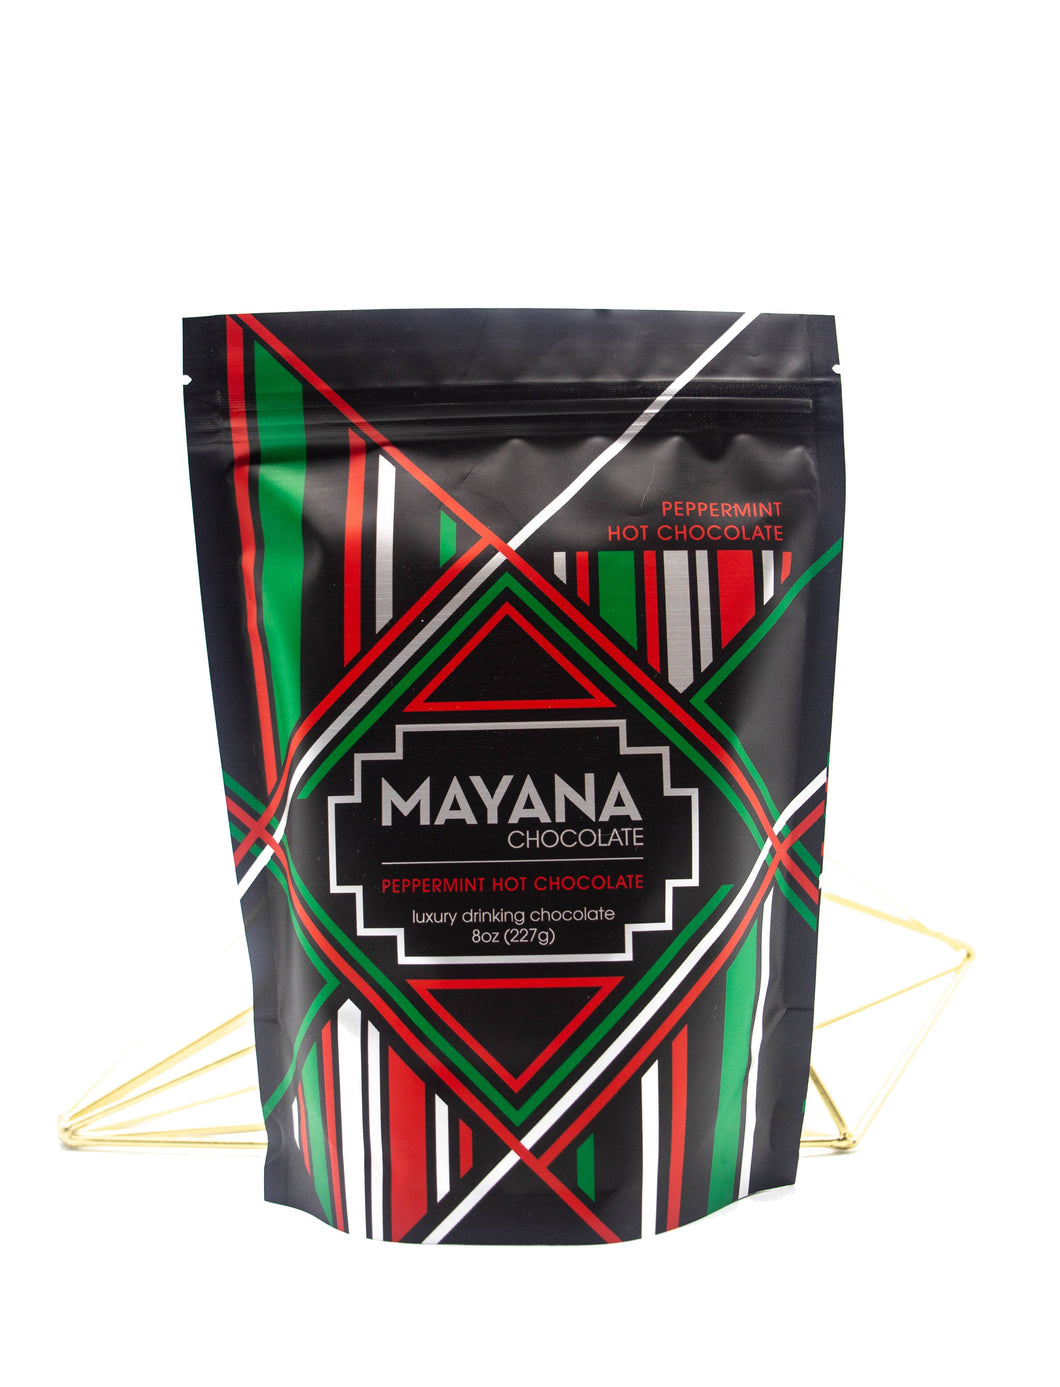 Mayana Chocolate - Peppermint Hot Chocolate - Limited 2021 Availability